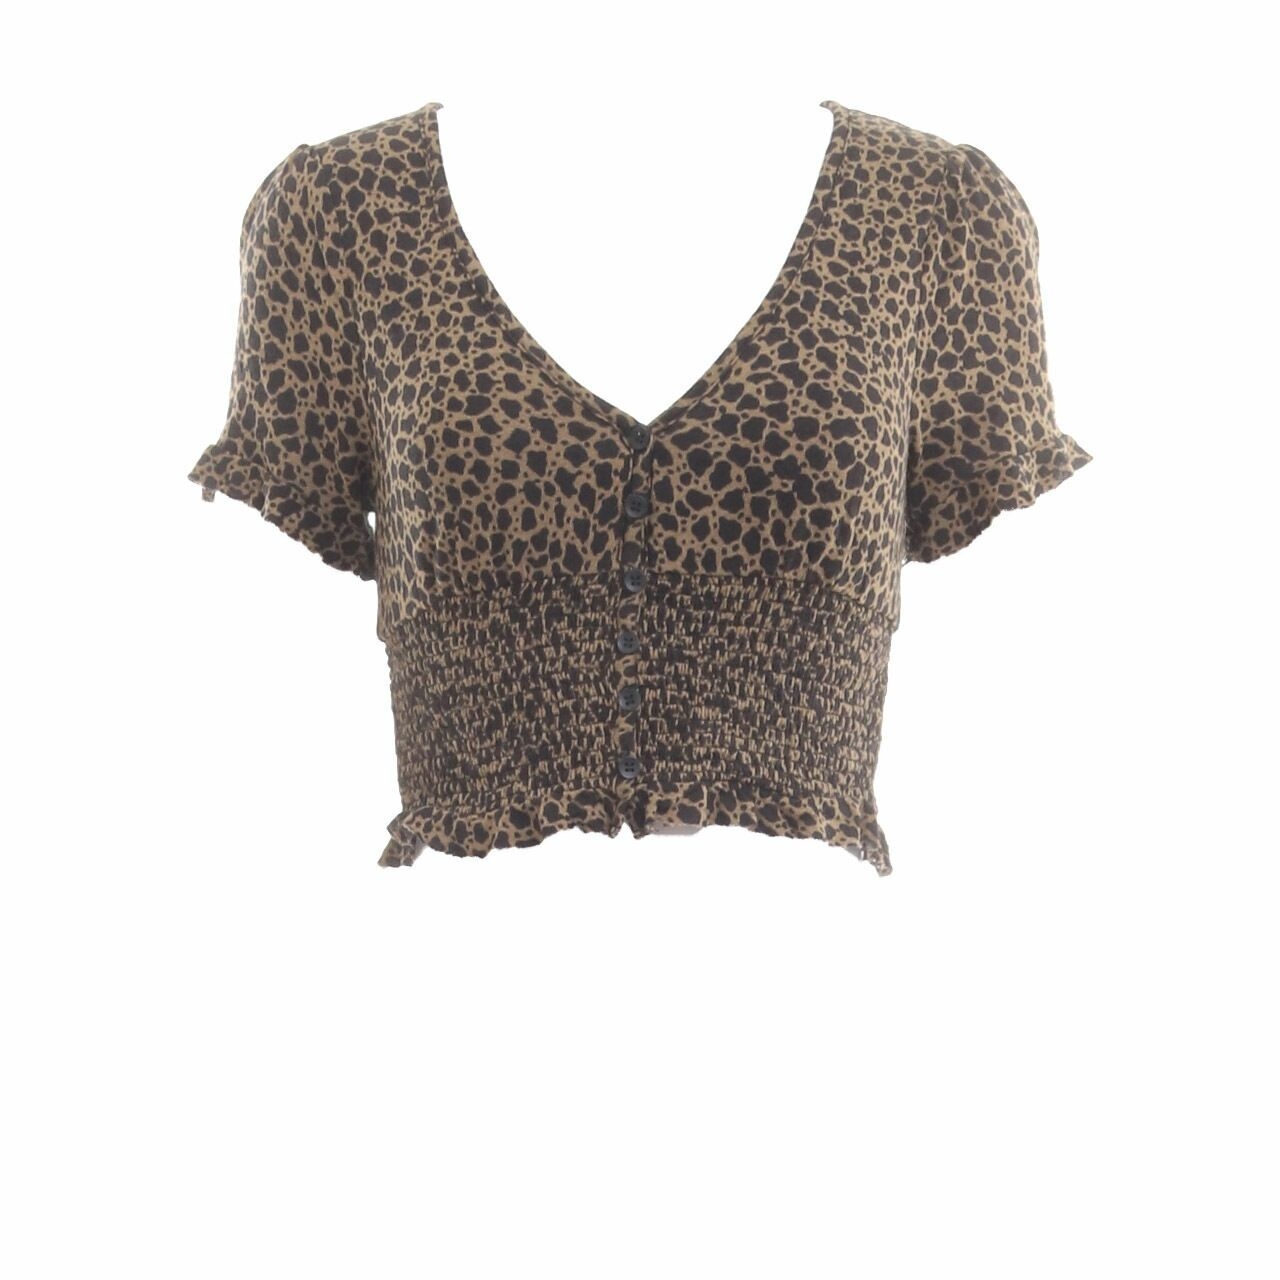 Urban Outfitters Black Leopard Blouse Crop